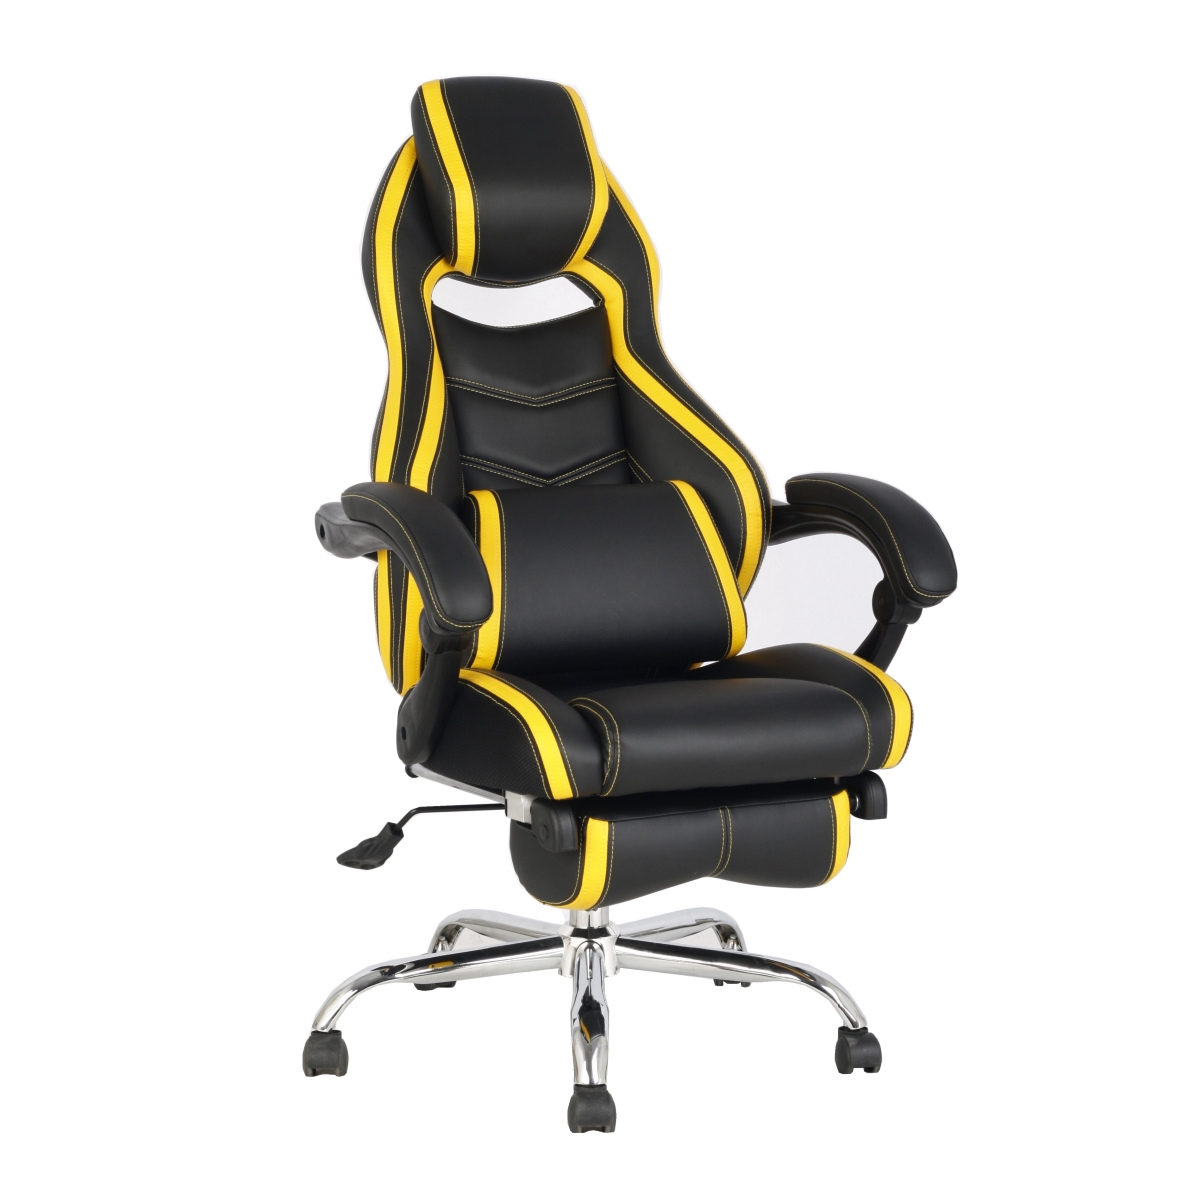 Tyfc22017 26.77 In. Executive High Back Pu Leather Office Chair, Yellow